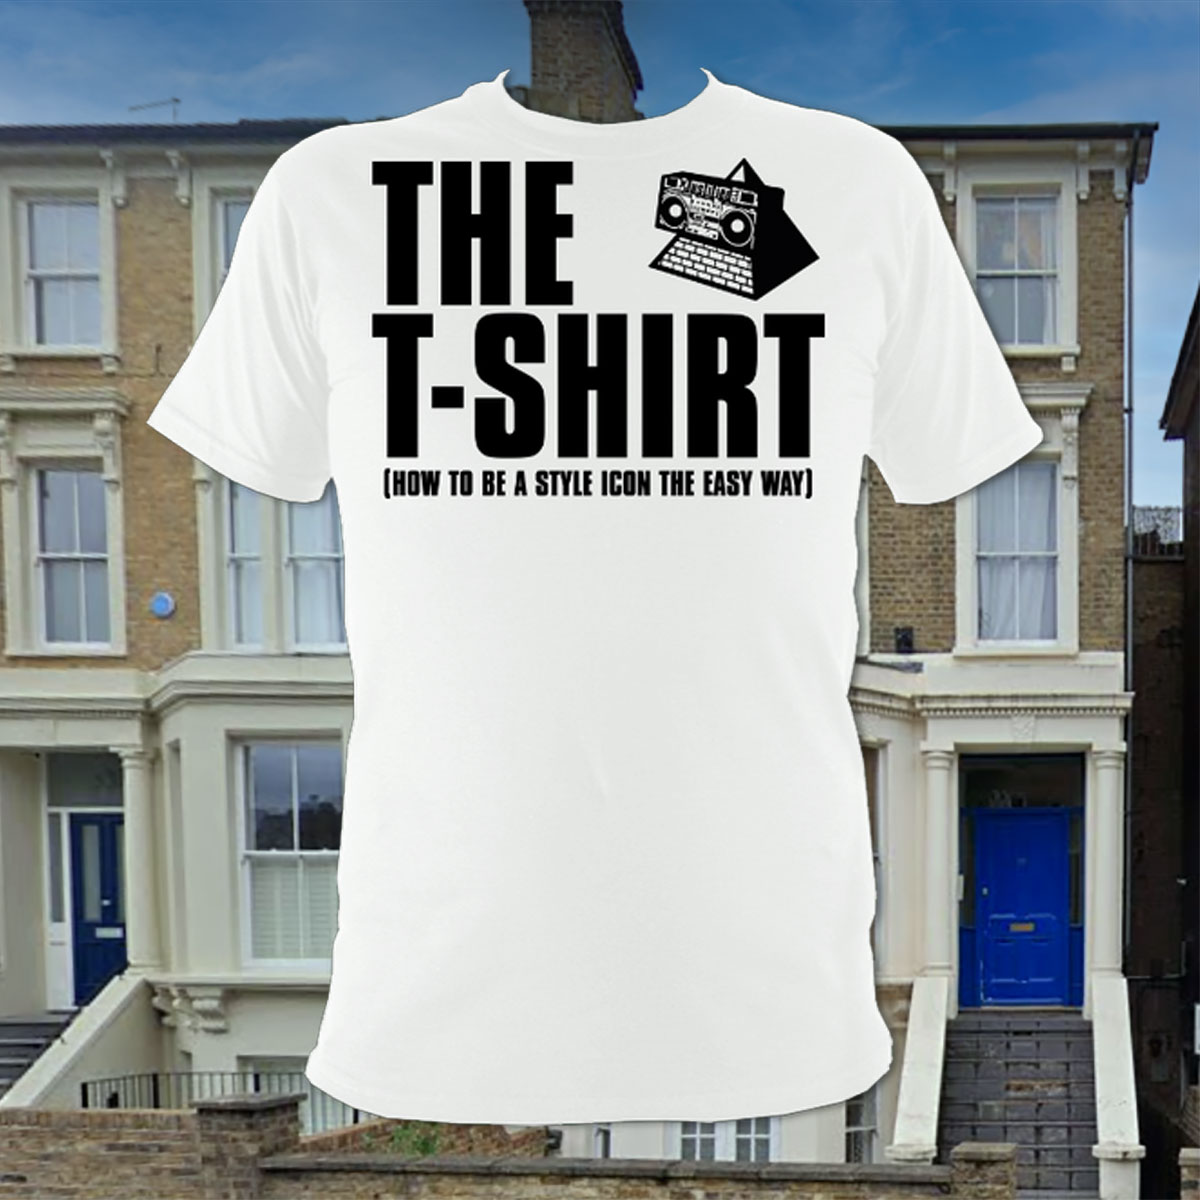 binde inden længe pludselig Inspired by The KLF The Manual - The T-Shirt How to be a style icon the  easy way - Short Sleeve - Black on White - T-Shirt Slogans Custom 3d  Prints, T-Shirts